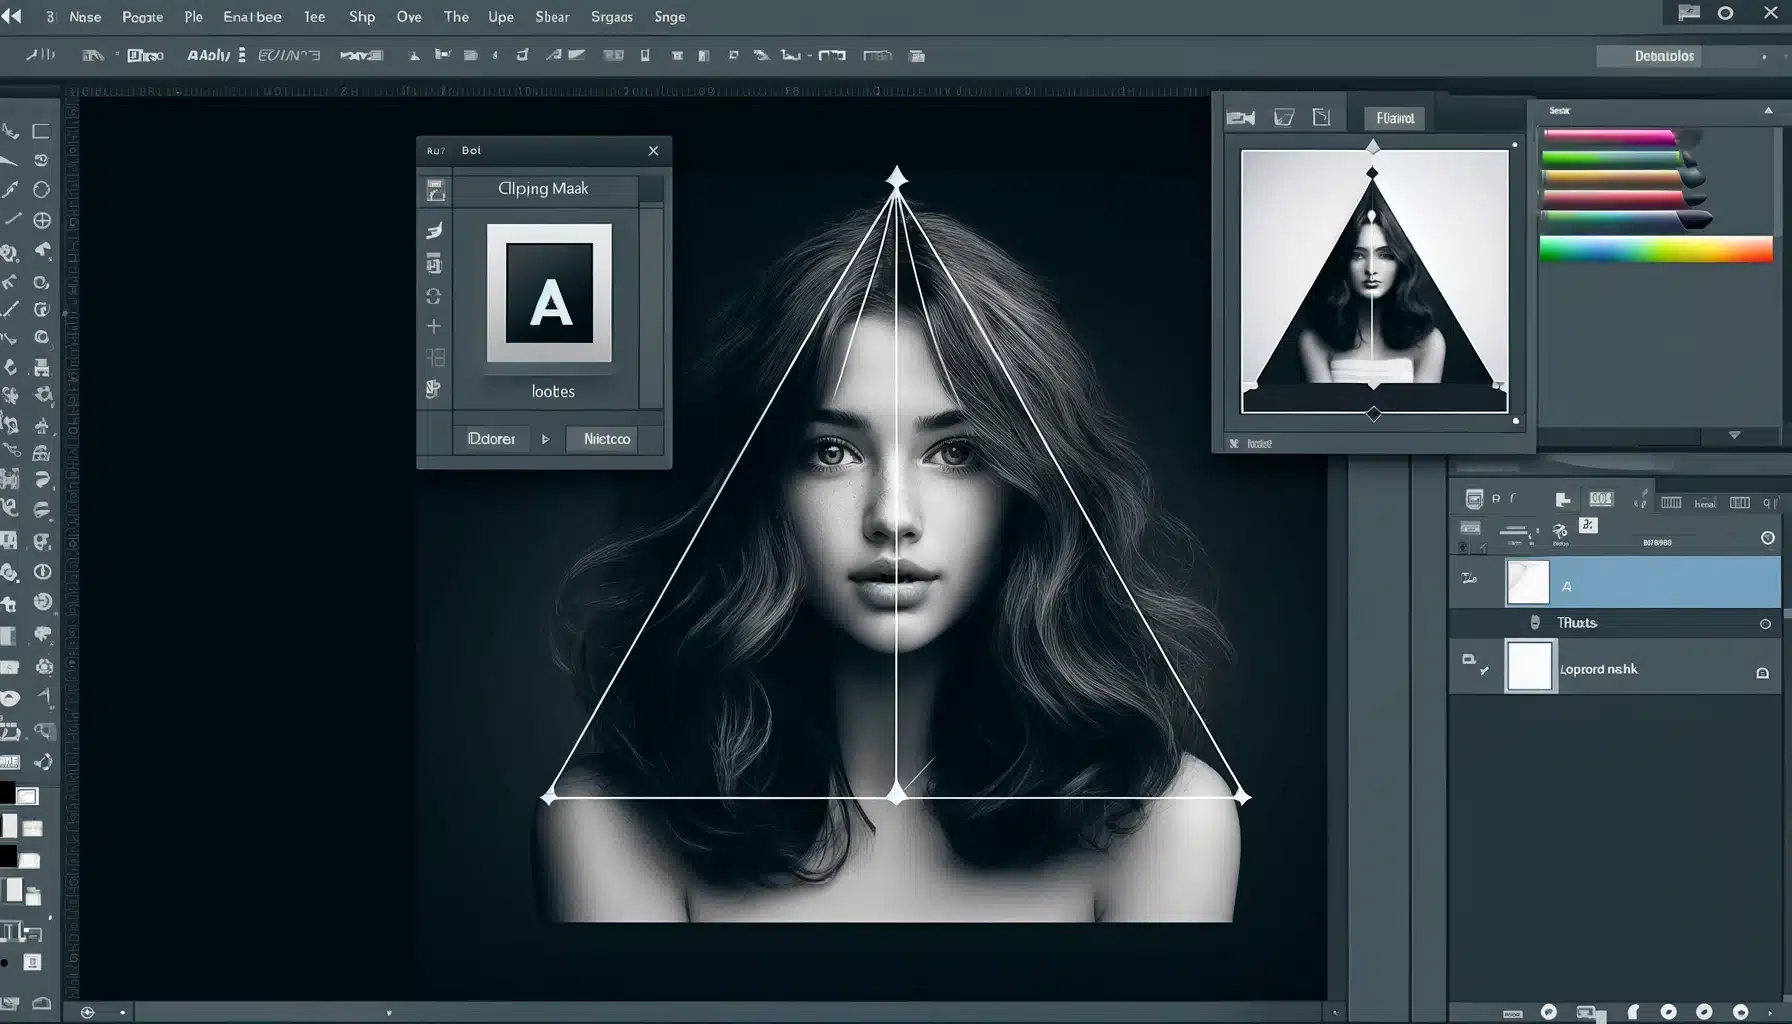 Clipping Mask displaying a pyramid shape containing a photographic portrait of a girl, illustrating advanced image editing capabilities.